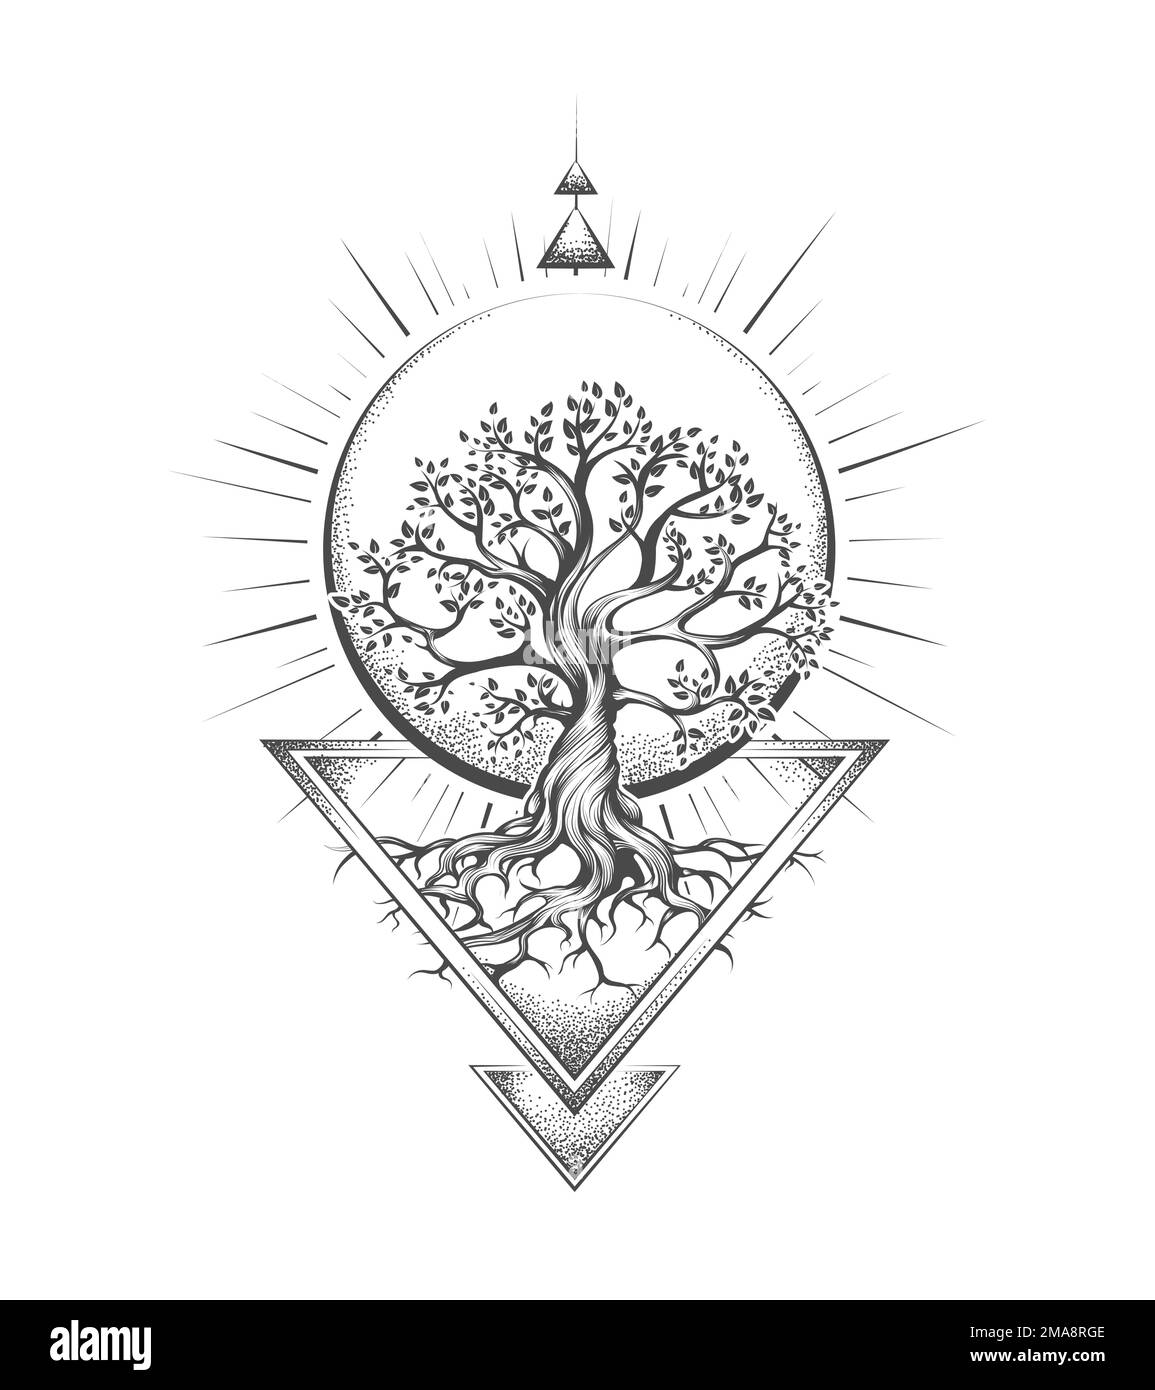 30 Best Tree Of Life Tattoo Design Ideas and What They Mean  Saved  Tattoo